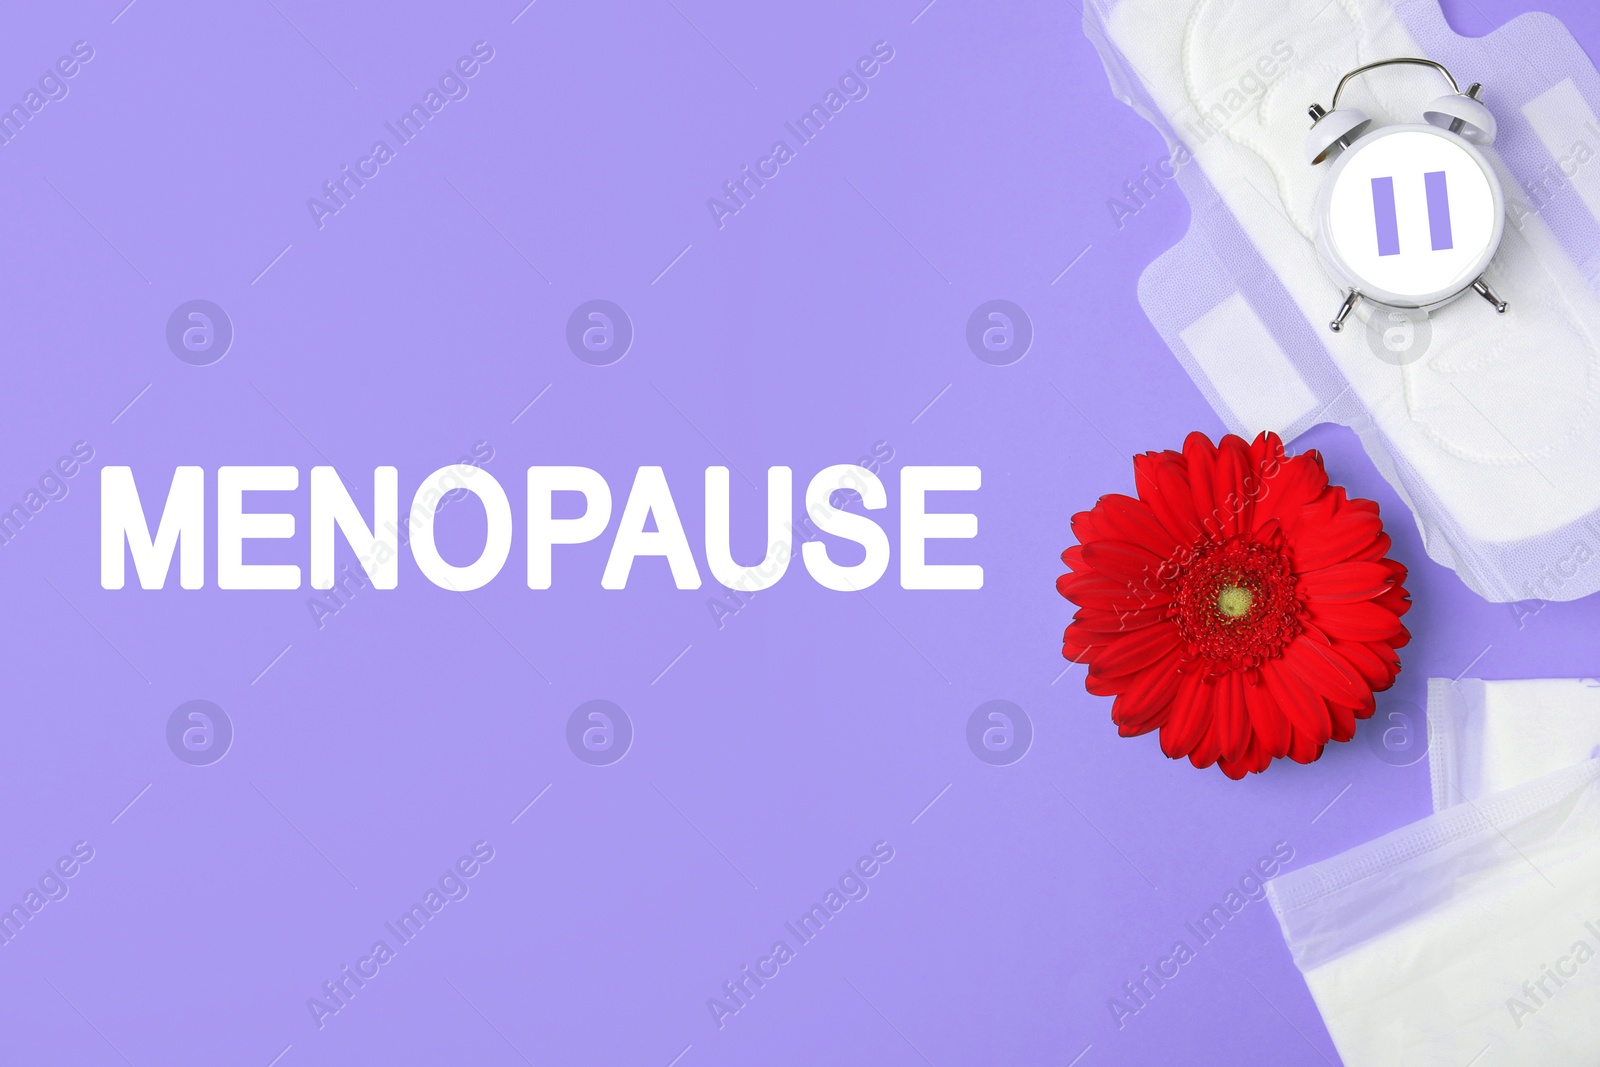 Image of Menopause word, alarm clock with pause symbol, flower and pads on violet background, flat lay